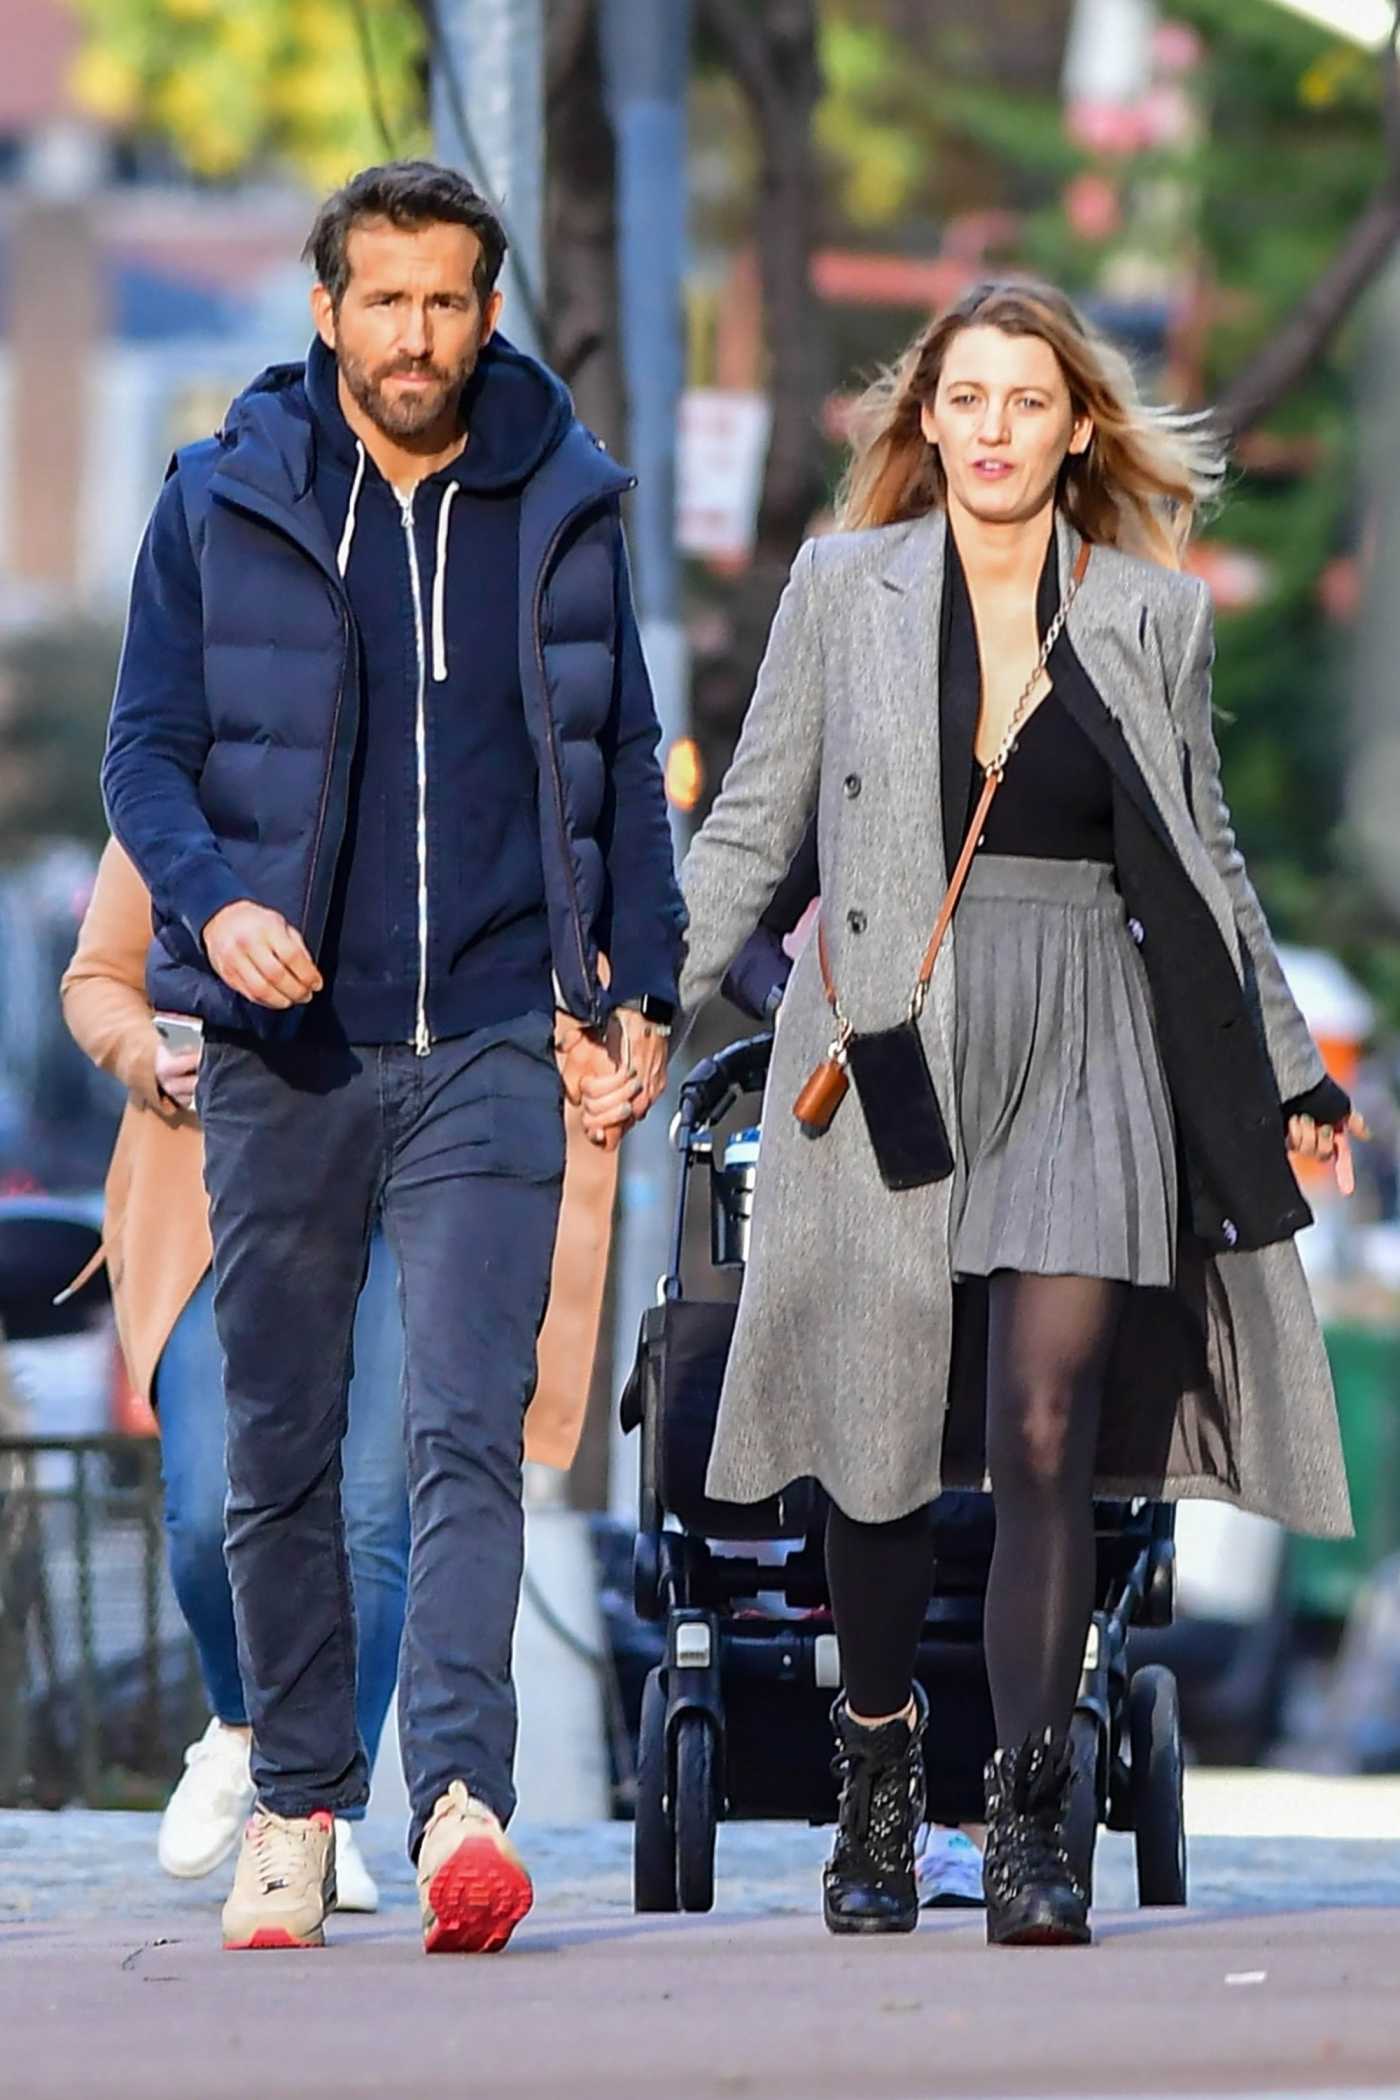 Blake Lively in a Grey Coat Was Seen Out with Ryan Reynolds in New York 11/11/2021